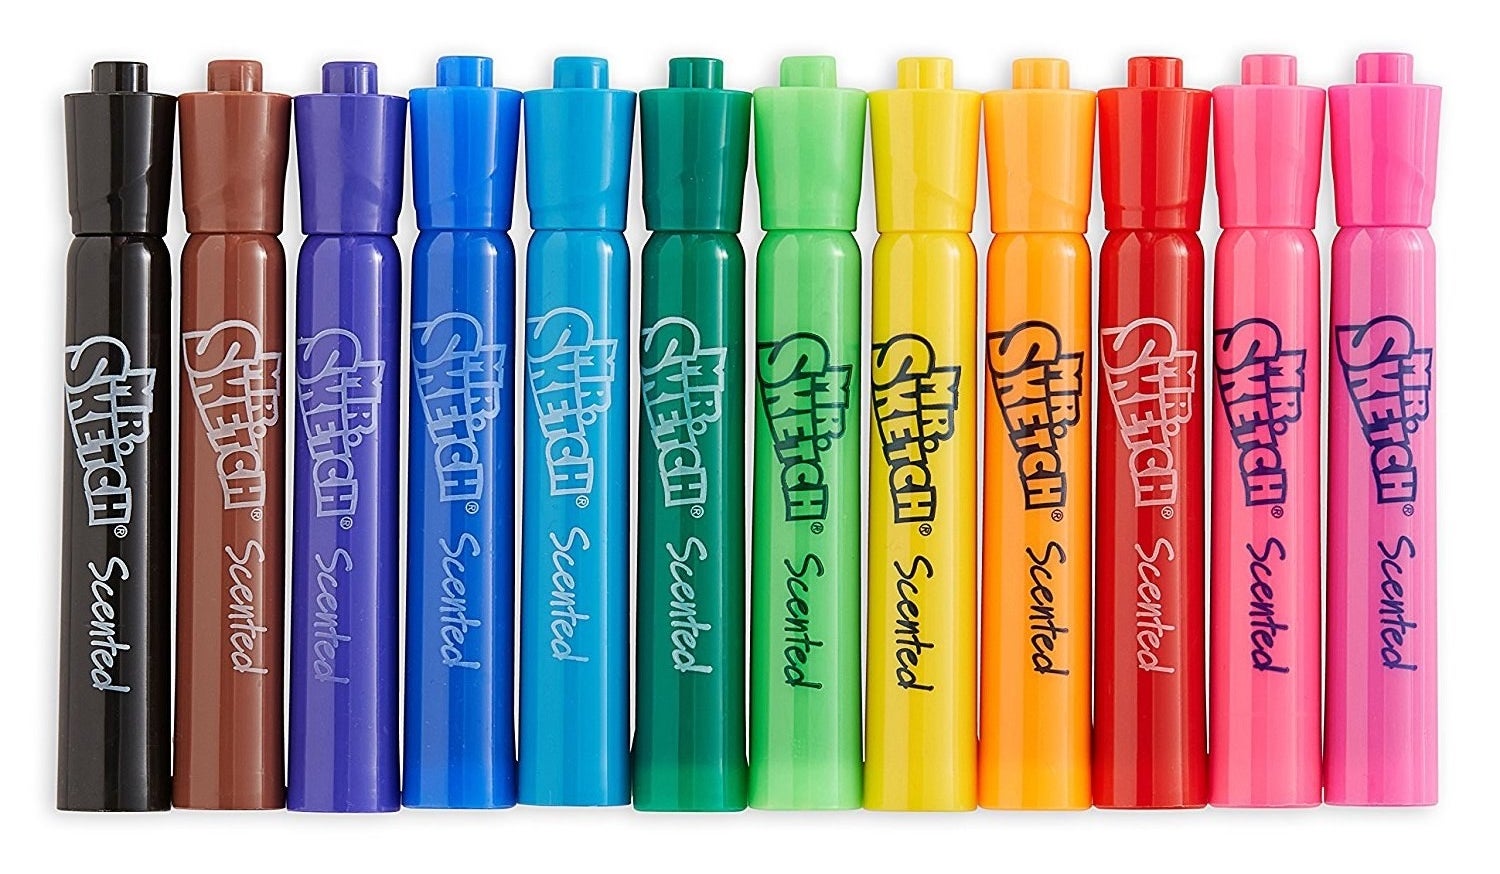 classic scented markers. pack of. you'll probably appreciate even more...